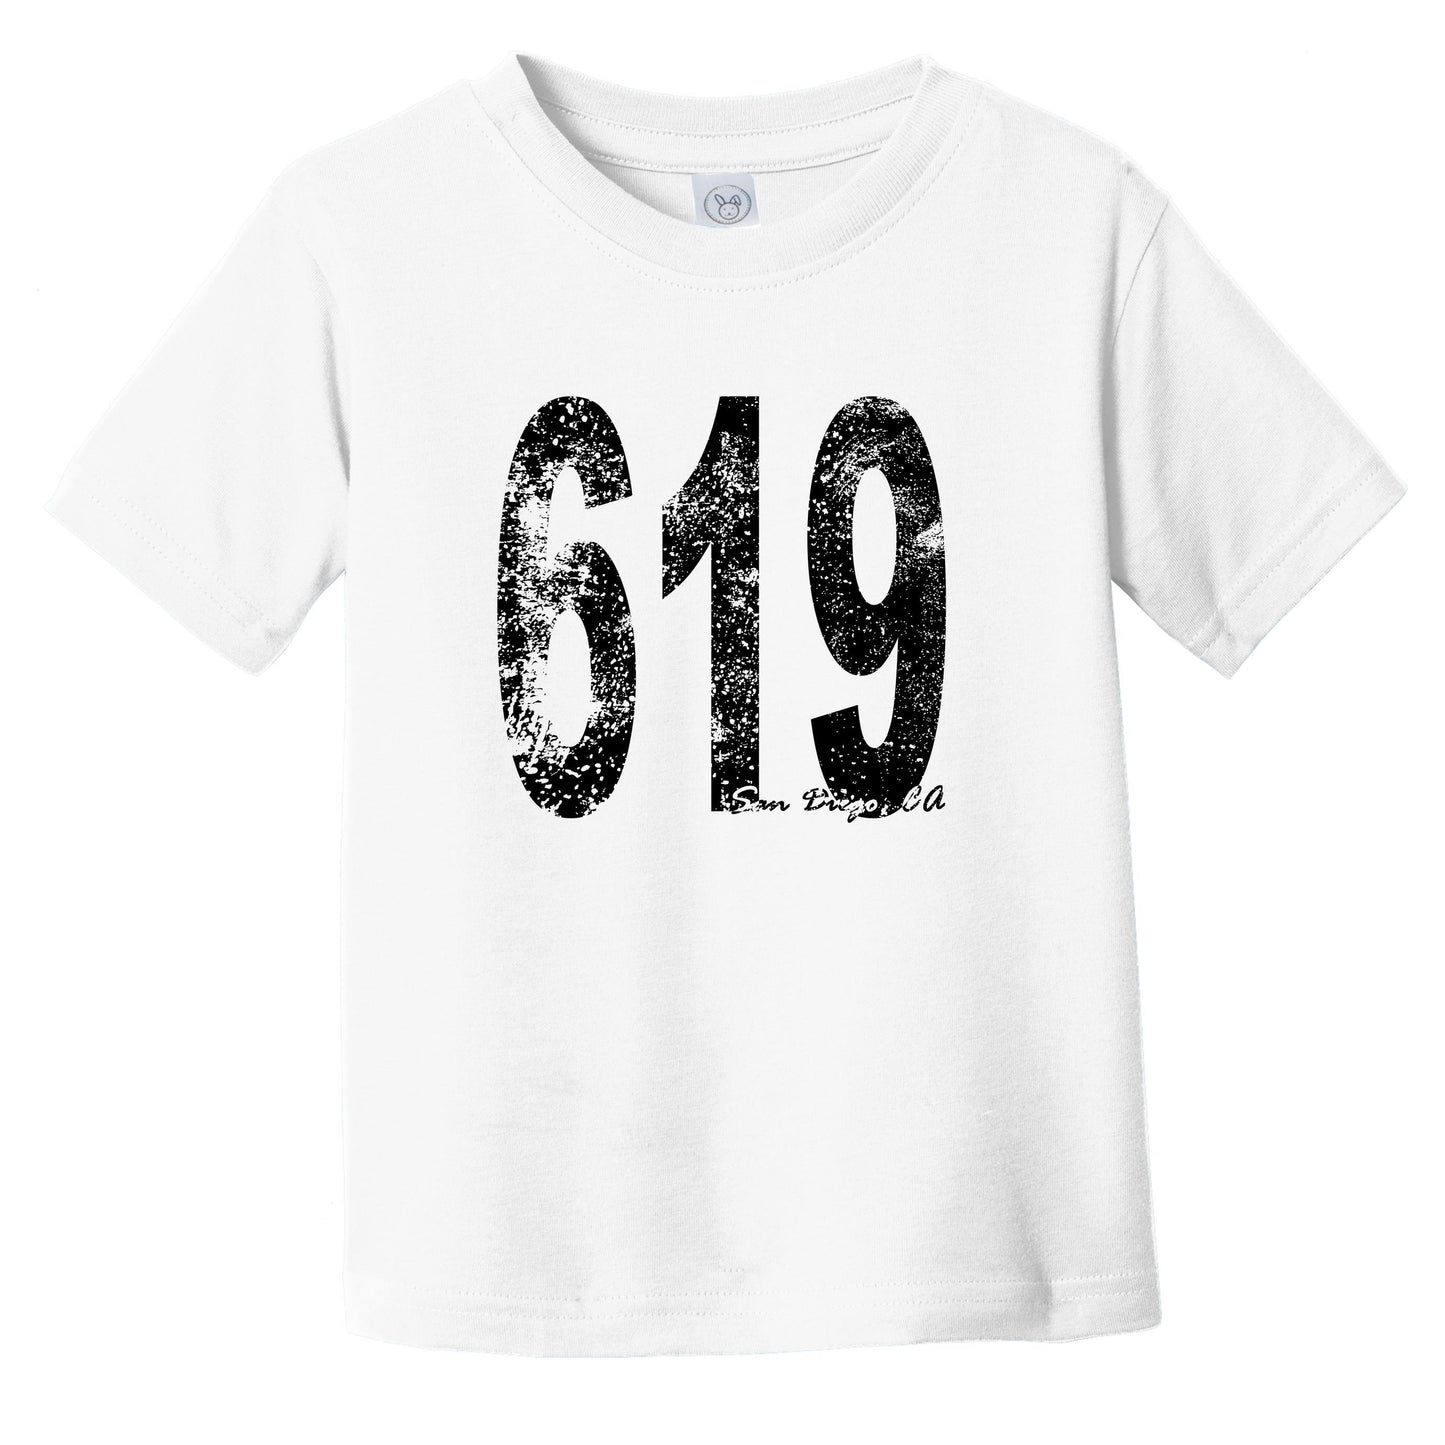 619 San Diego California Area Code Infant Toddler T-Shirt